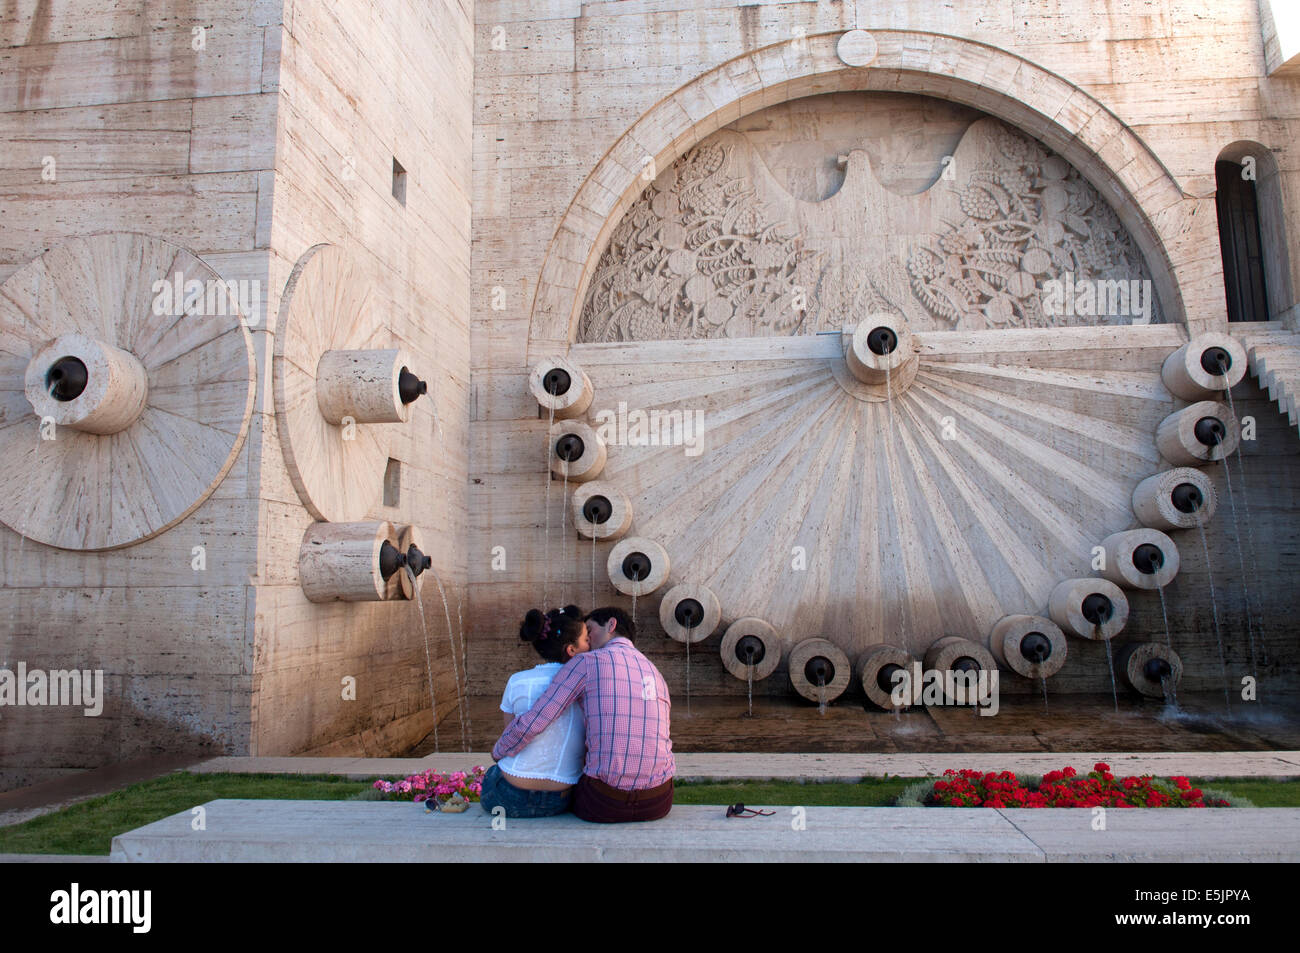 A couple kissing in front of the façade of the Cafesjian Center for the Arts, Cascade of Yerevan, Armenia Stock Photo